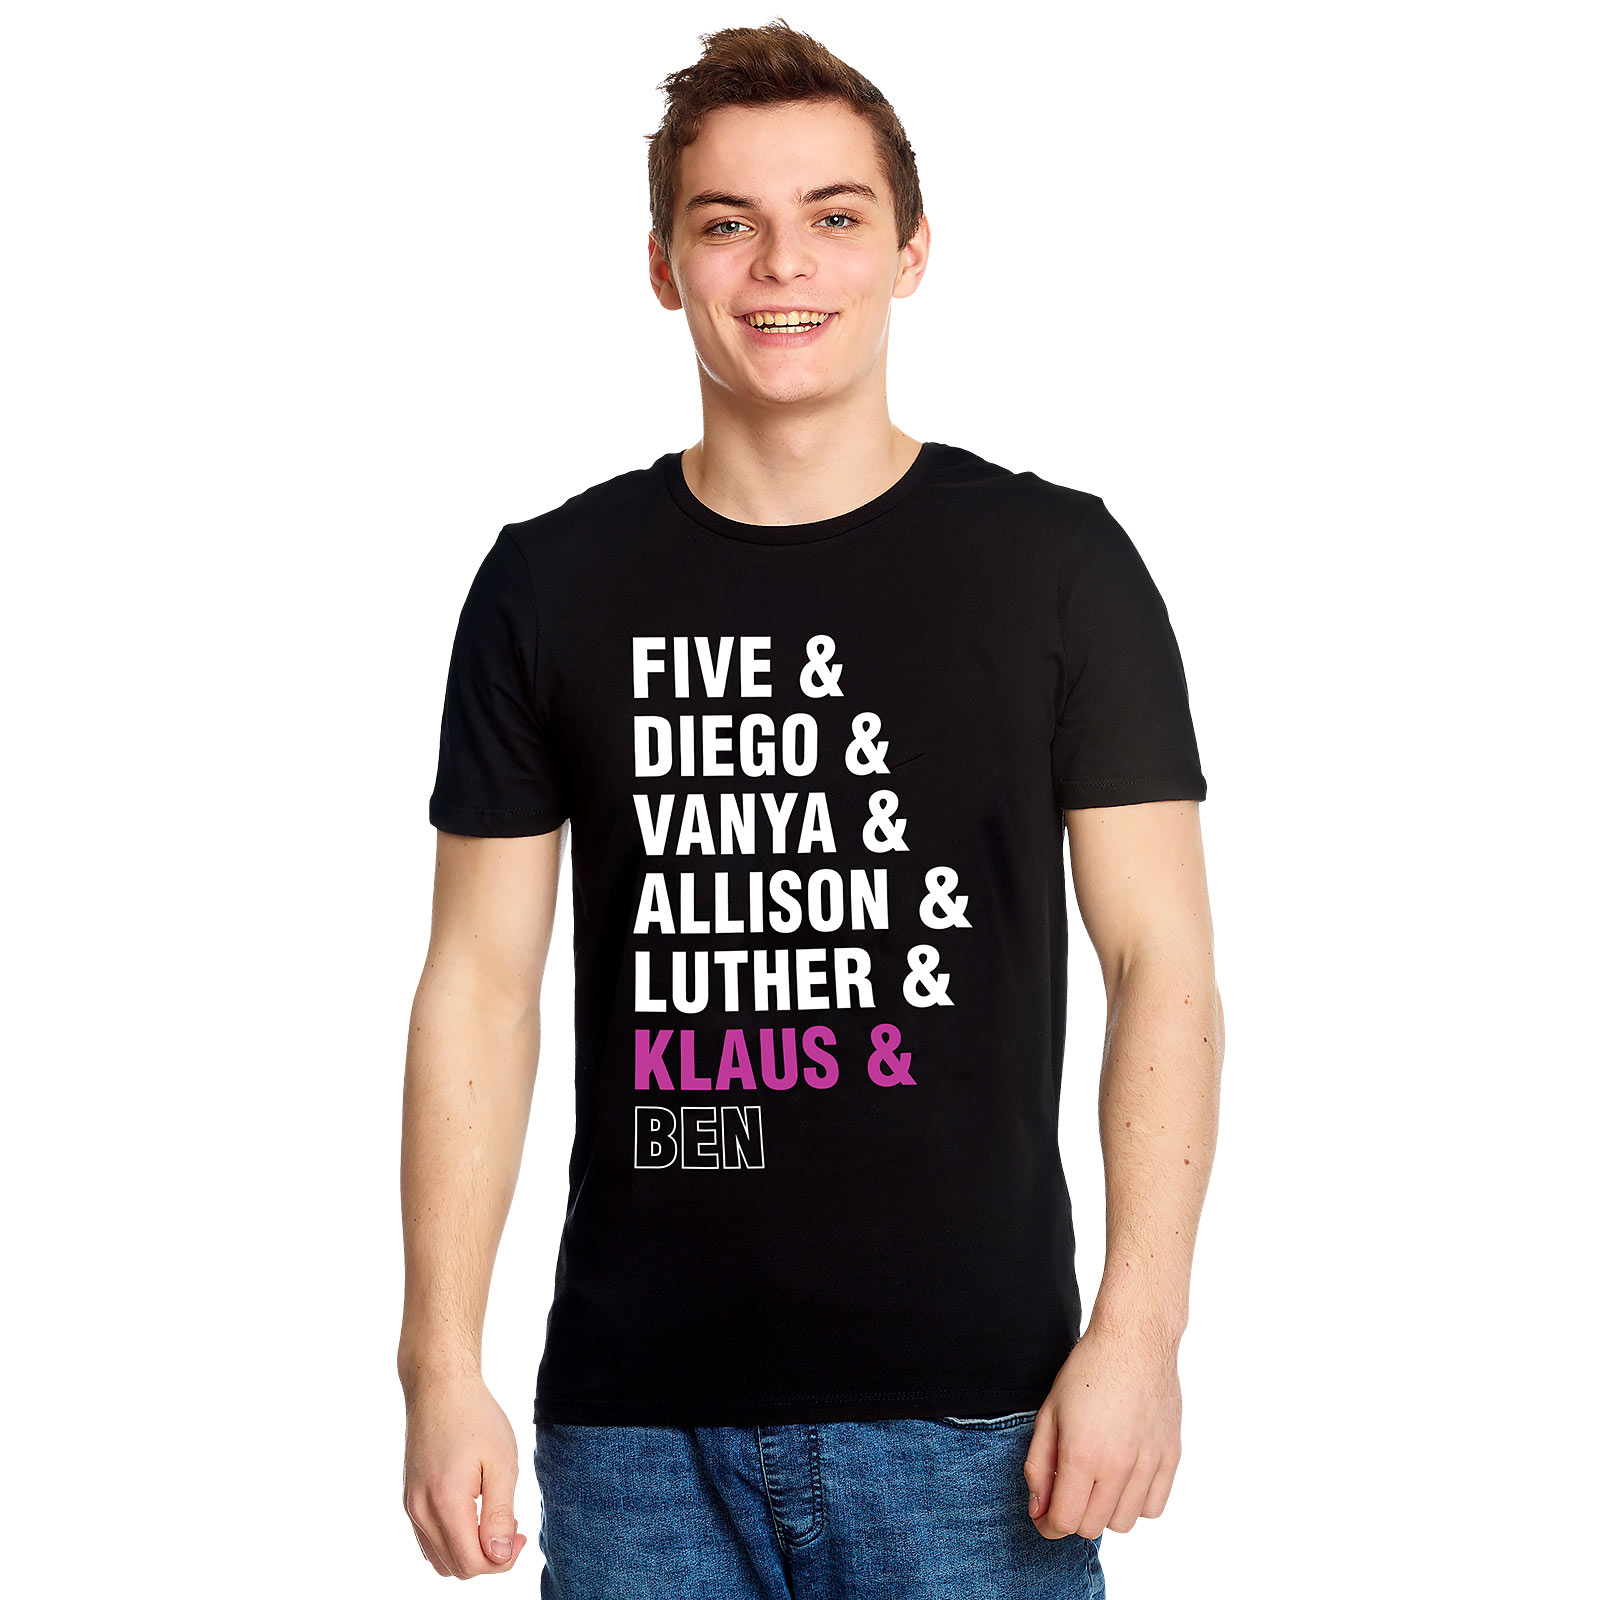 Hargreeves Family T-Shirt for The Umbrella Academy Fans